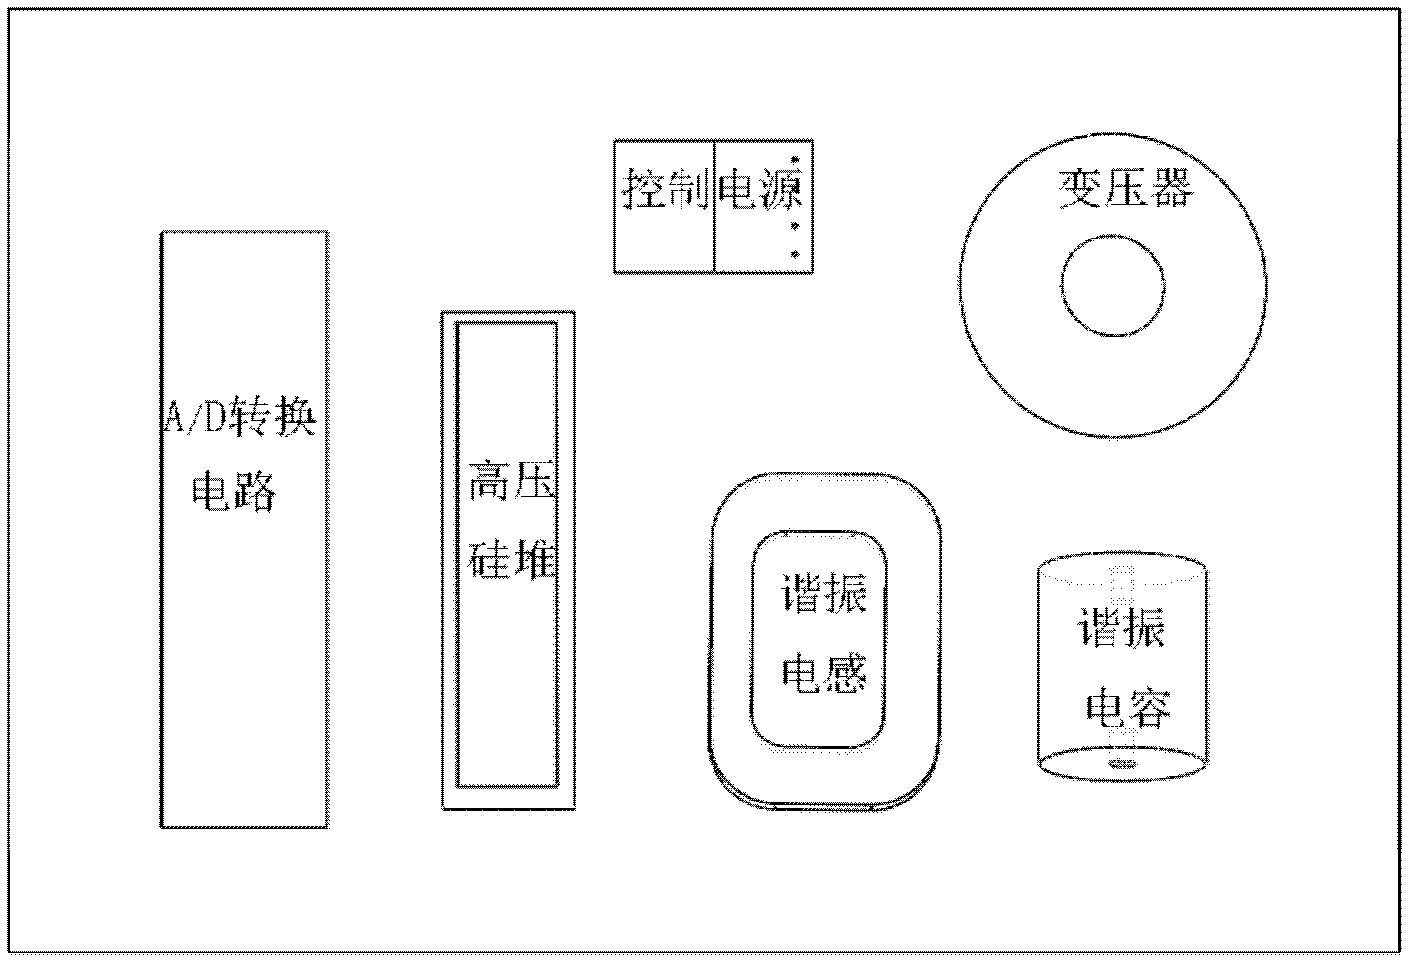 High-frequency high-voltage power supply structure